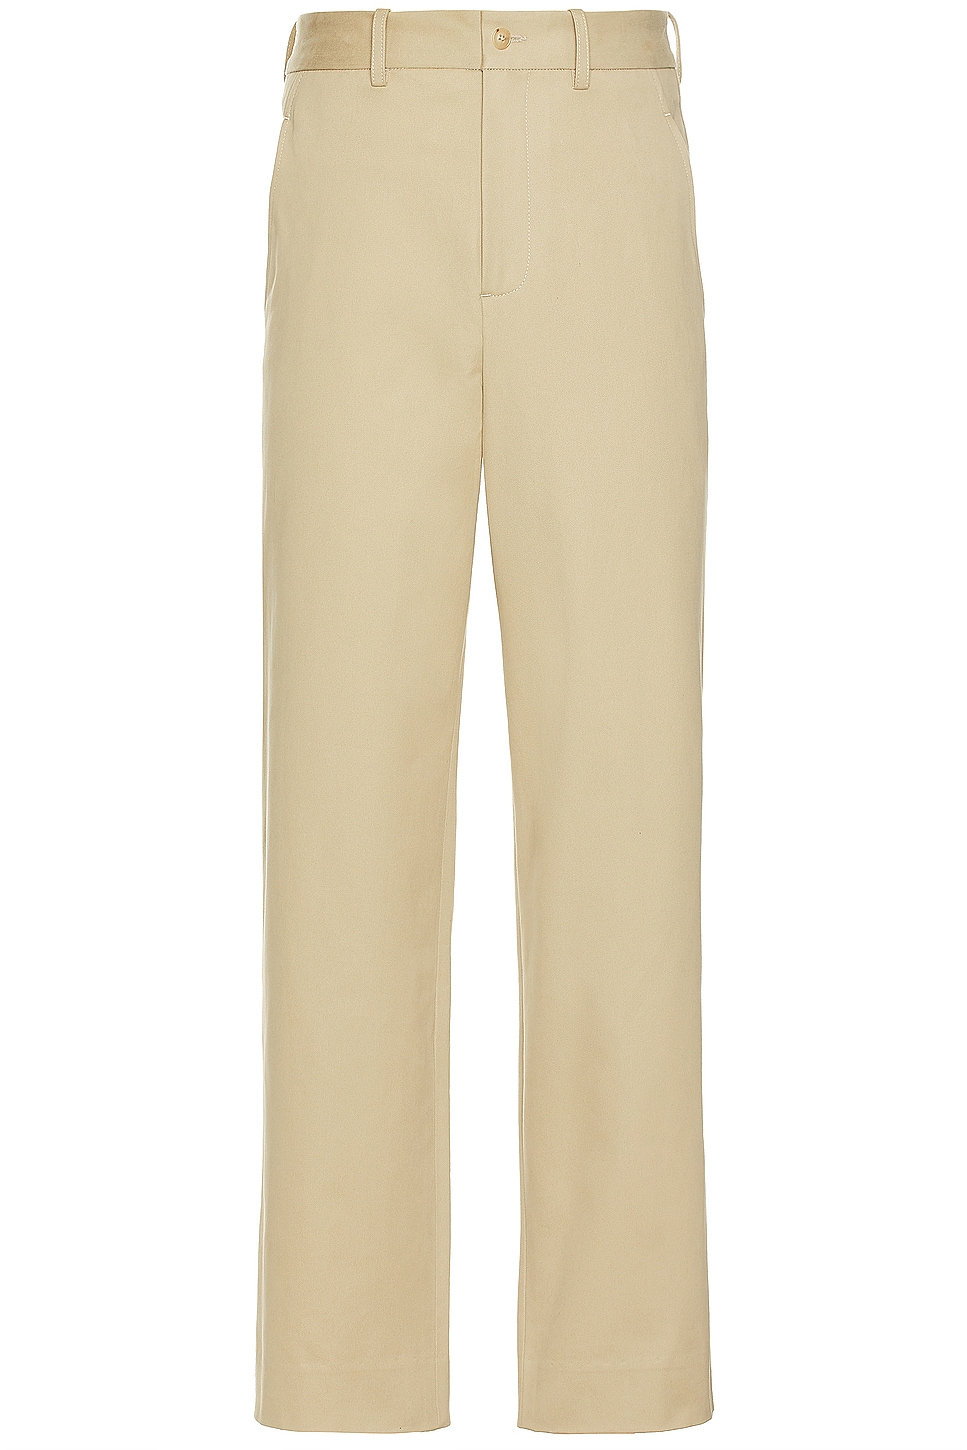 Image 1 of BODE Standard Trousers in Khaki